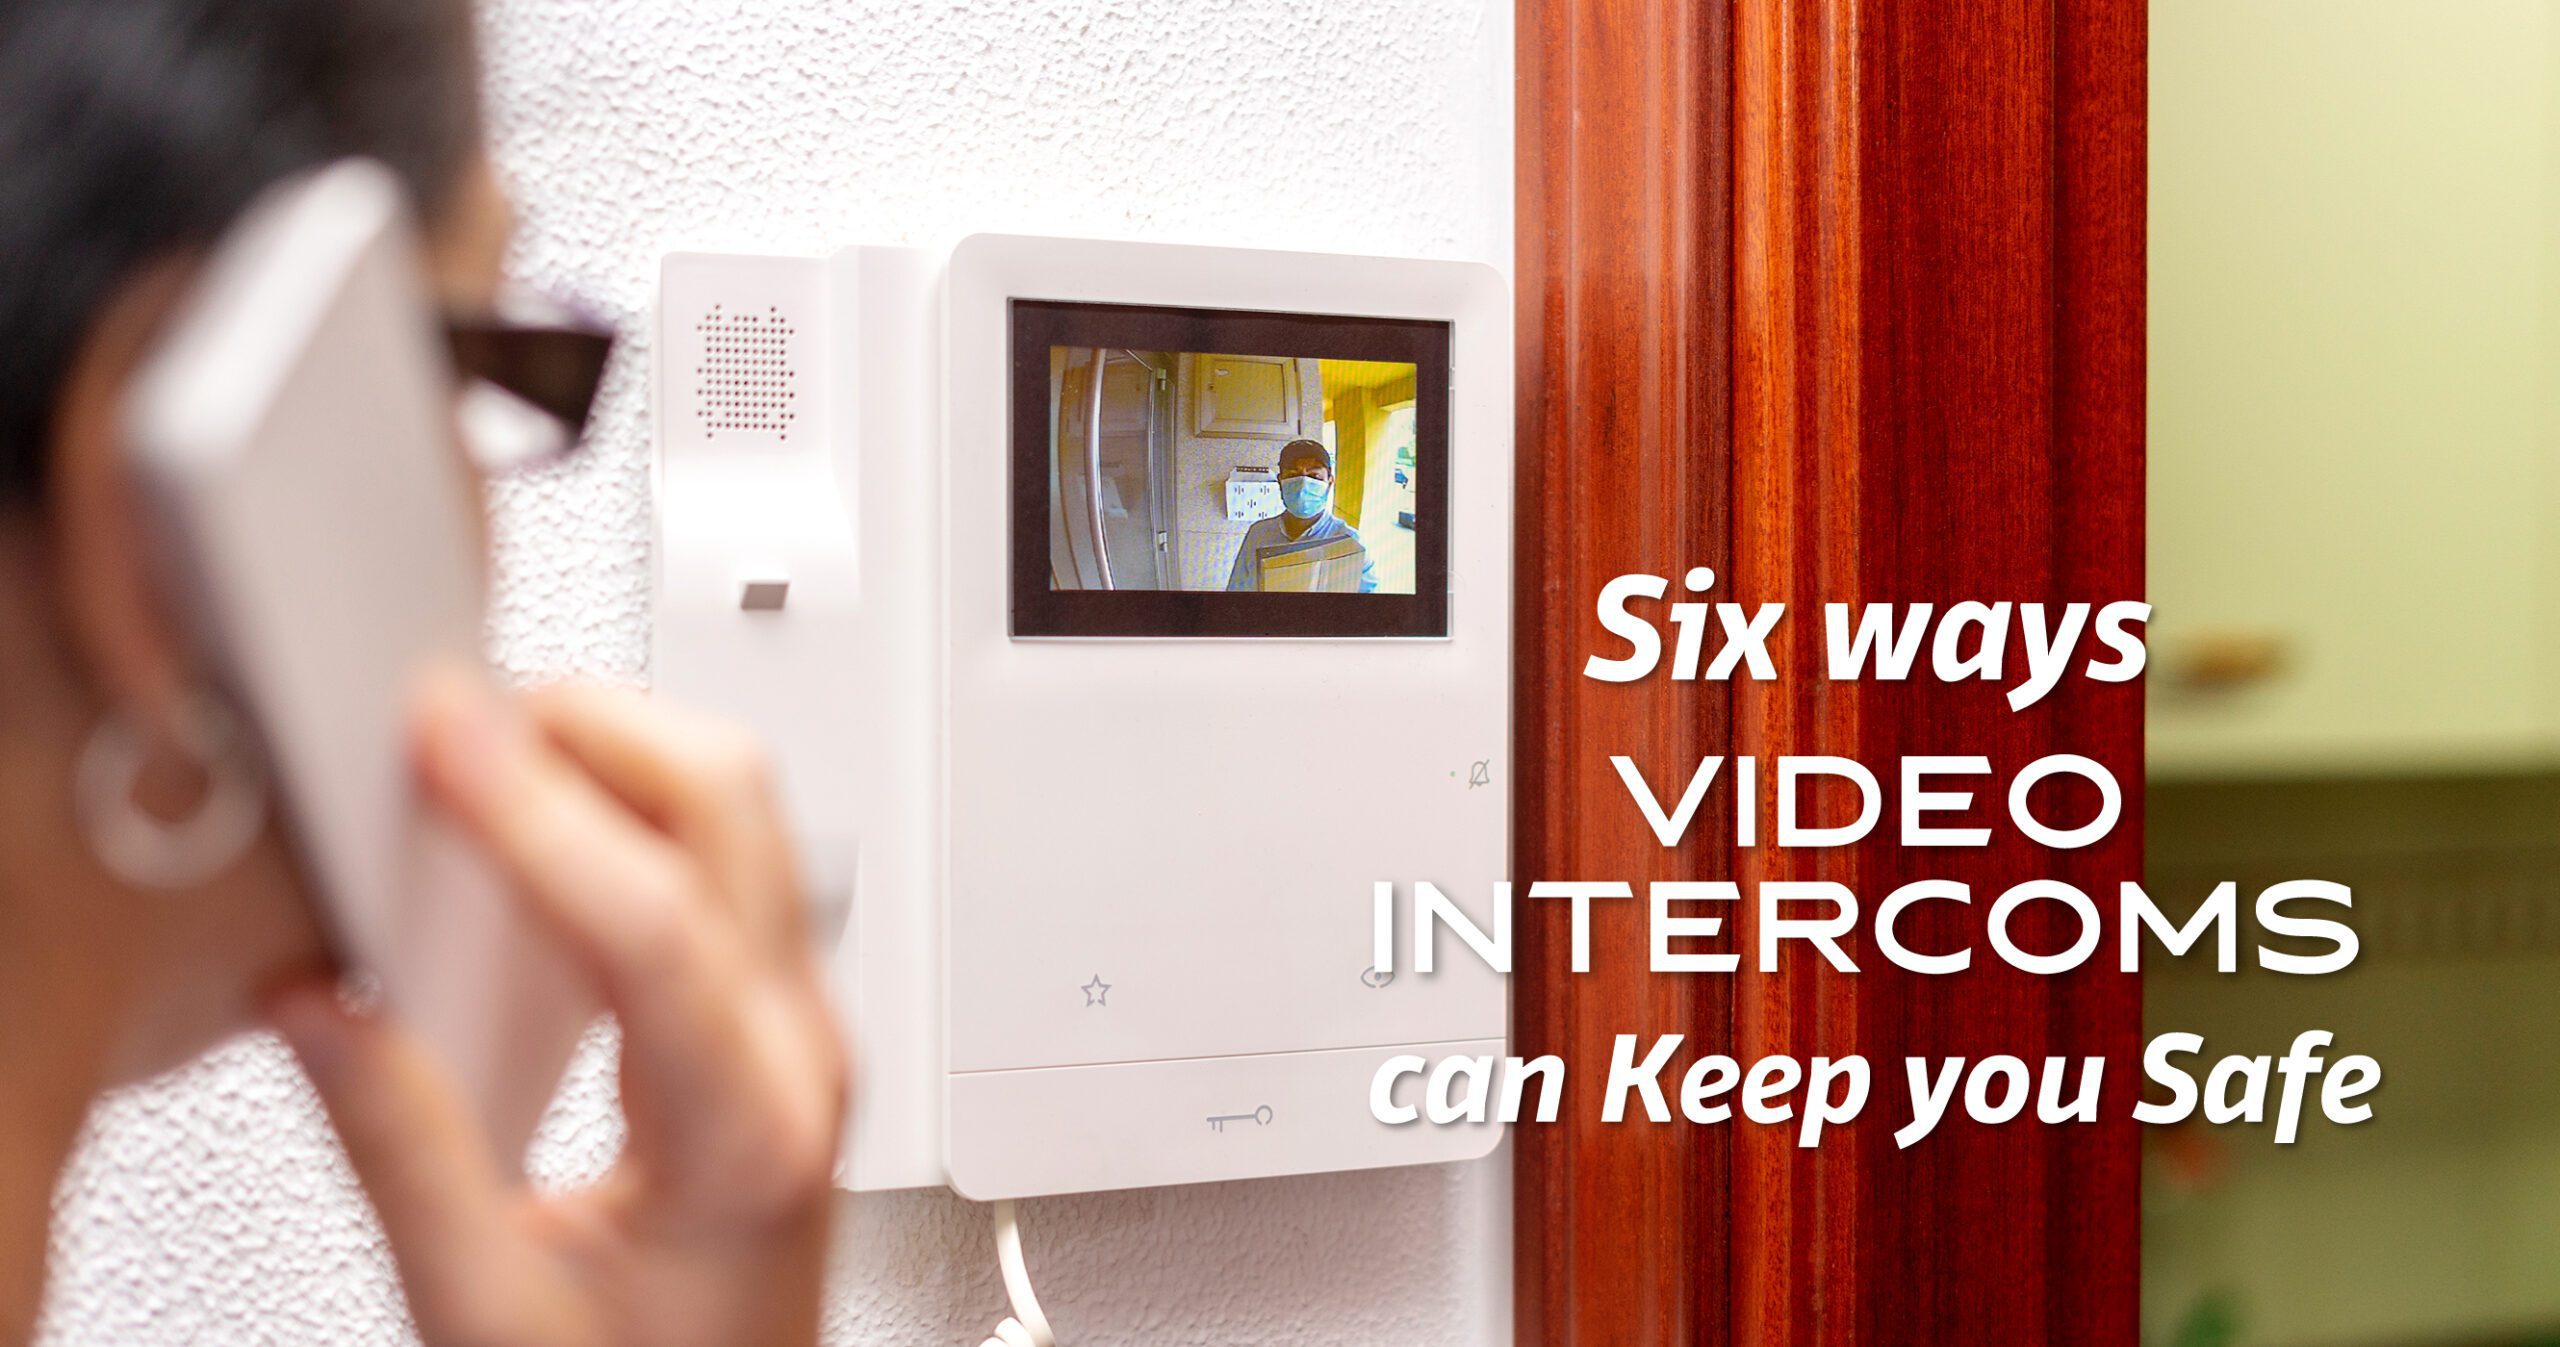 Featured image for “Six Ways Video Intercoms can keep you Safe”